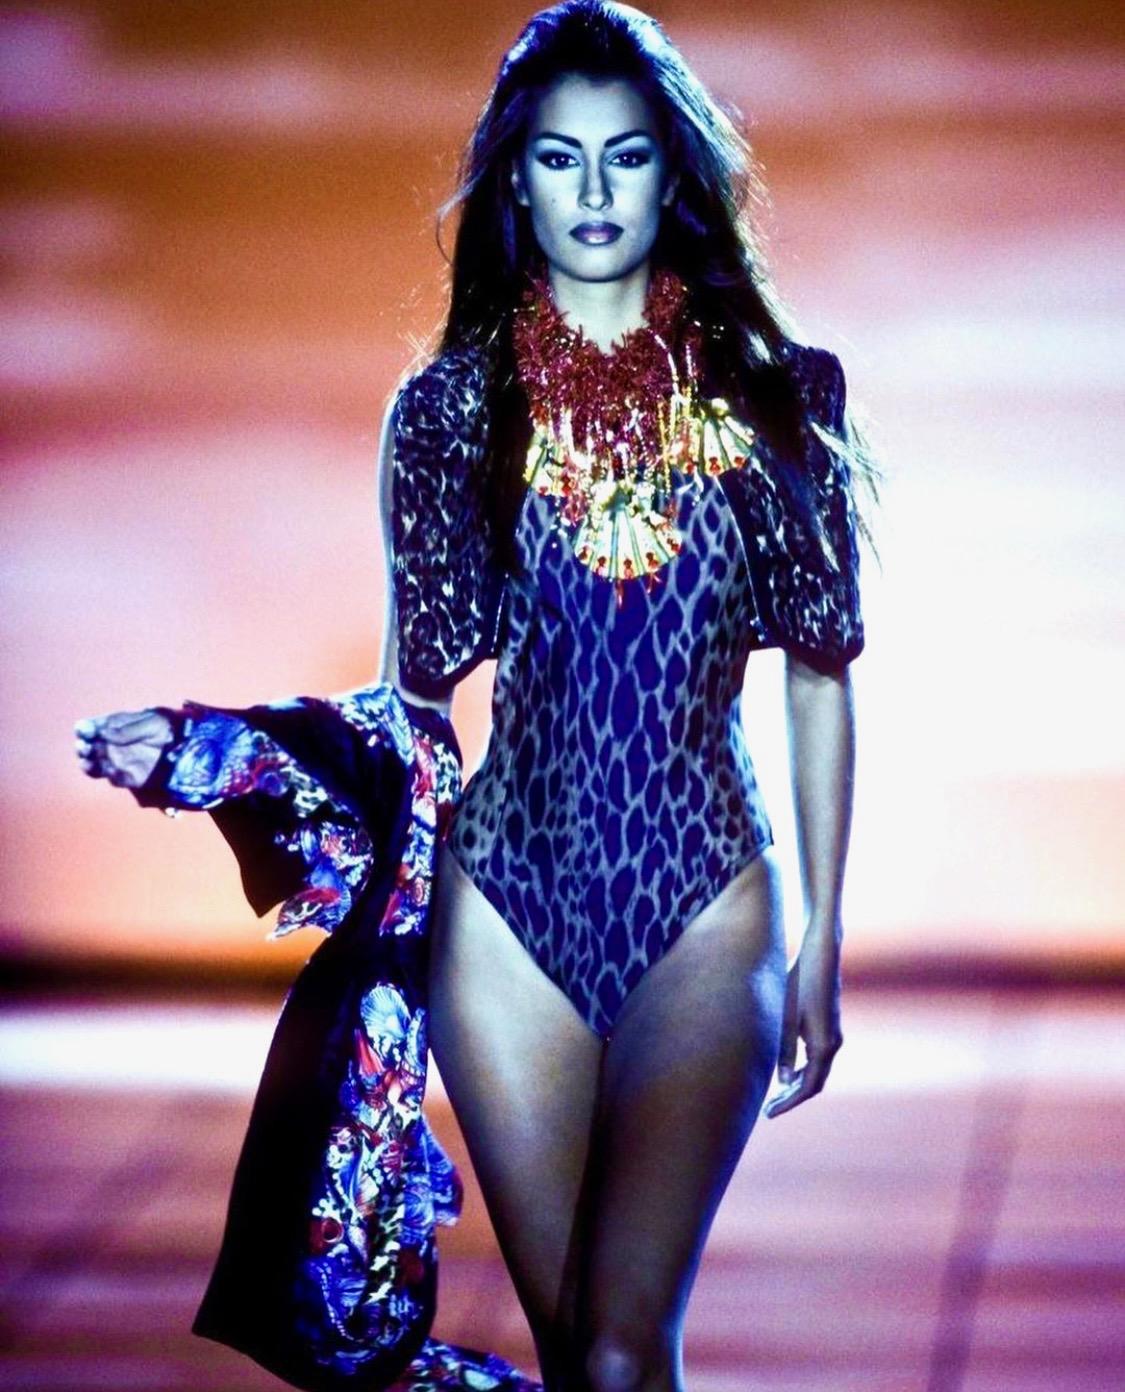 Presenting a beautiful brown leopard print Gianni Versace Couture one-piece bathing suit, designed by Gianni Versace. From the Spring/Summer 1992 collection, this bathing suit debuted as part of look number 26 on Yasmeen Ghauri and is covered in the